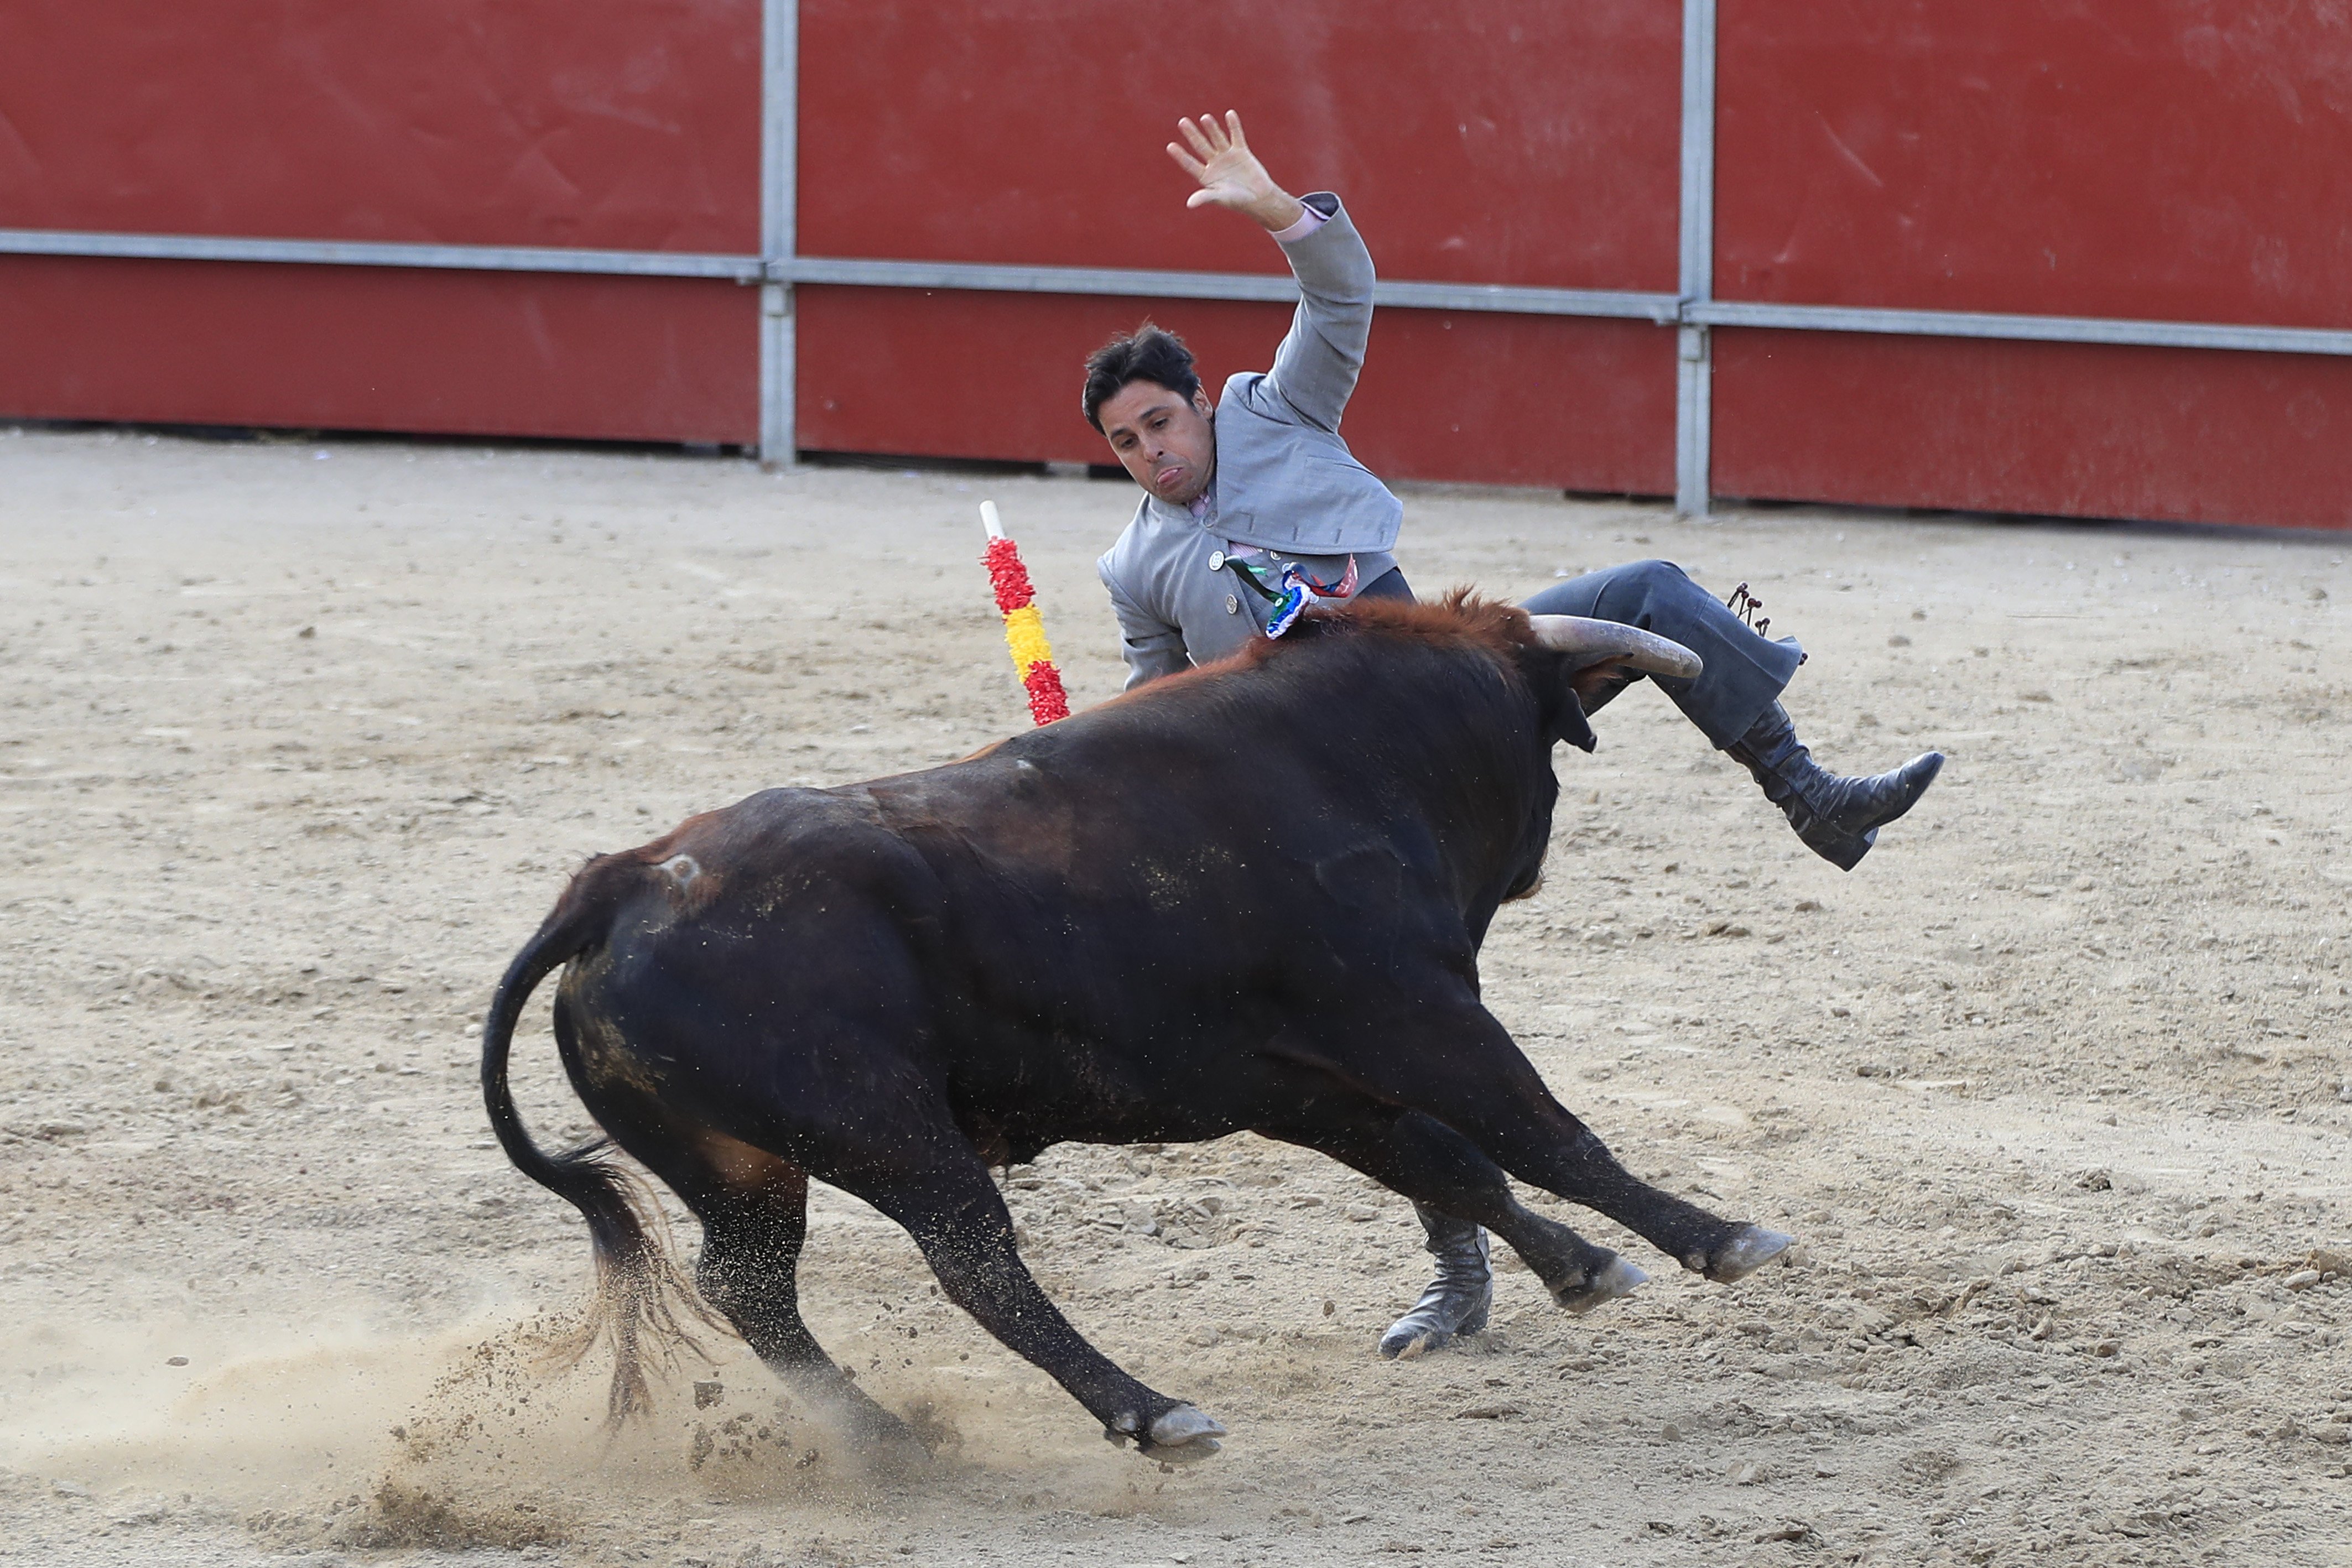 European Parliament rejects subsidies for bullfighting